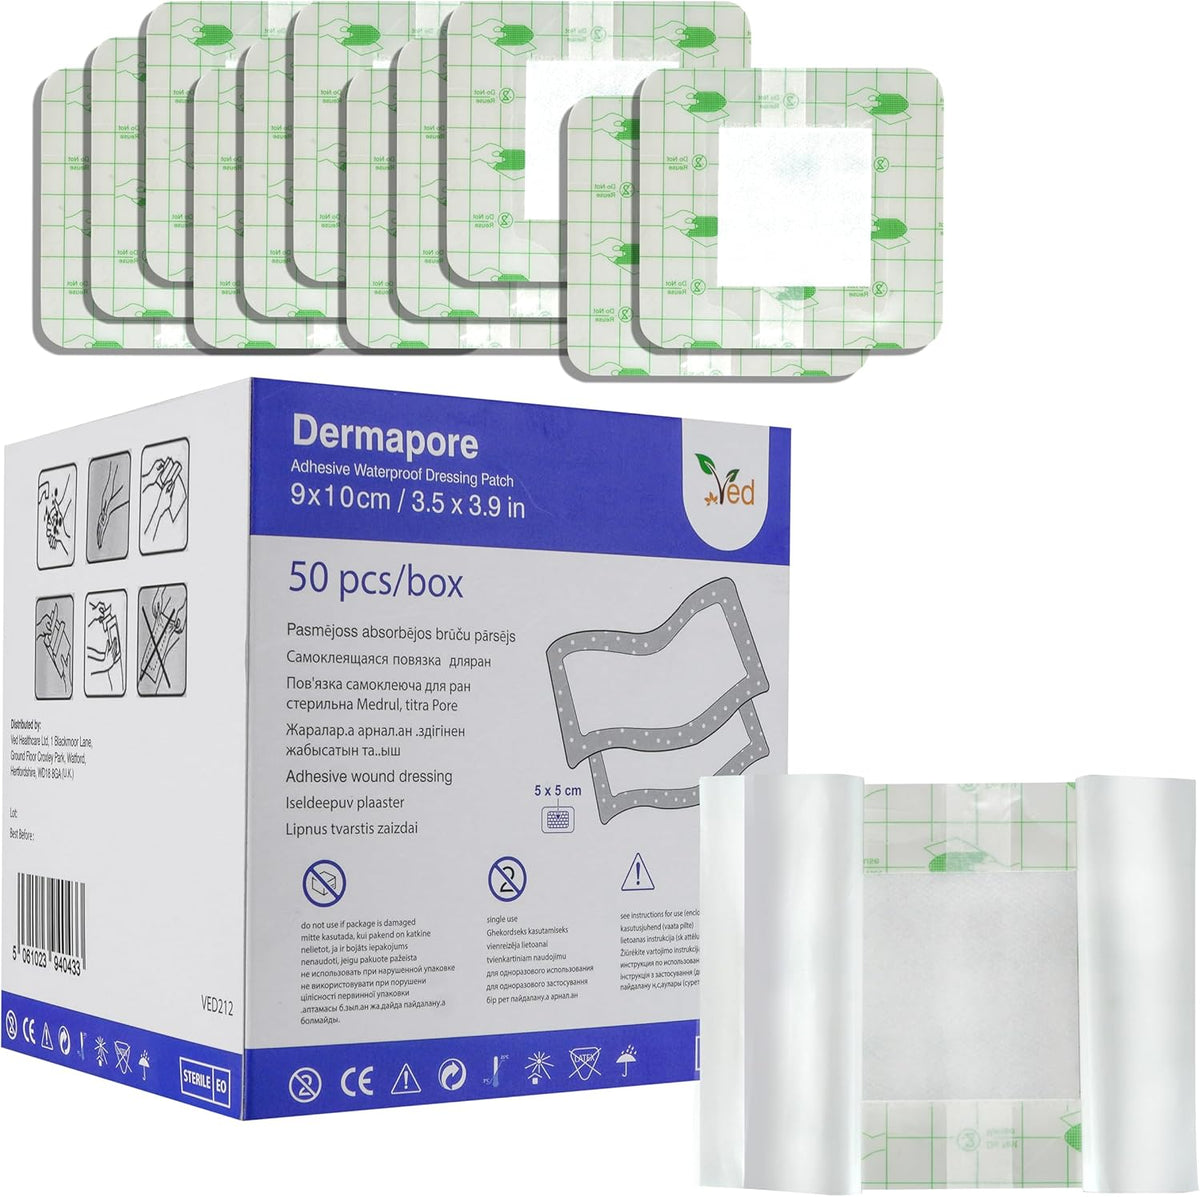 VED Dermapore Waterproof Adhesive Wound Dressing- Suitable for cuts and grazes, Diabetic Leg ulcers, venous Leg ulcers, Small Pressure sores- Medium, 9 x 10cm (Pack of 50).